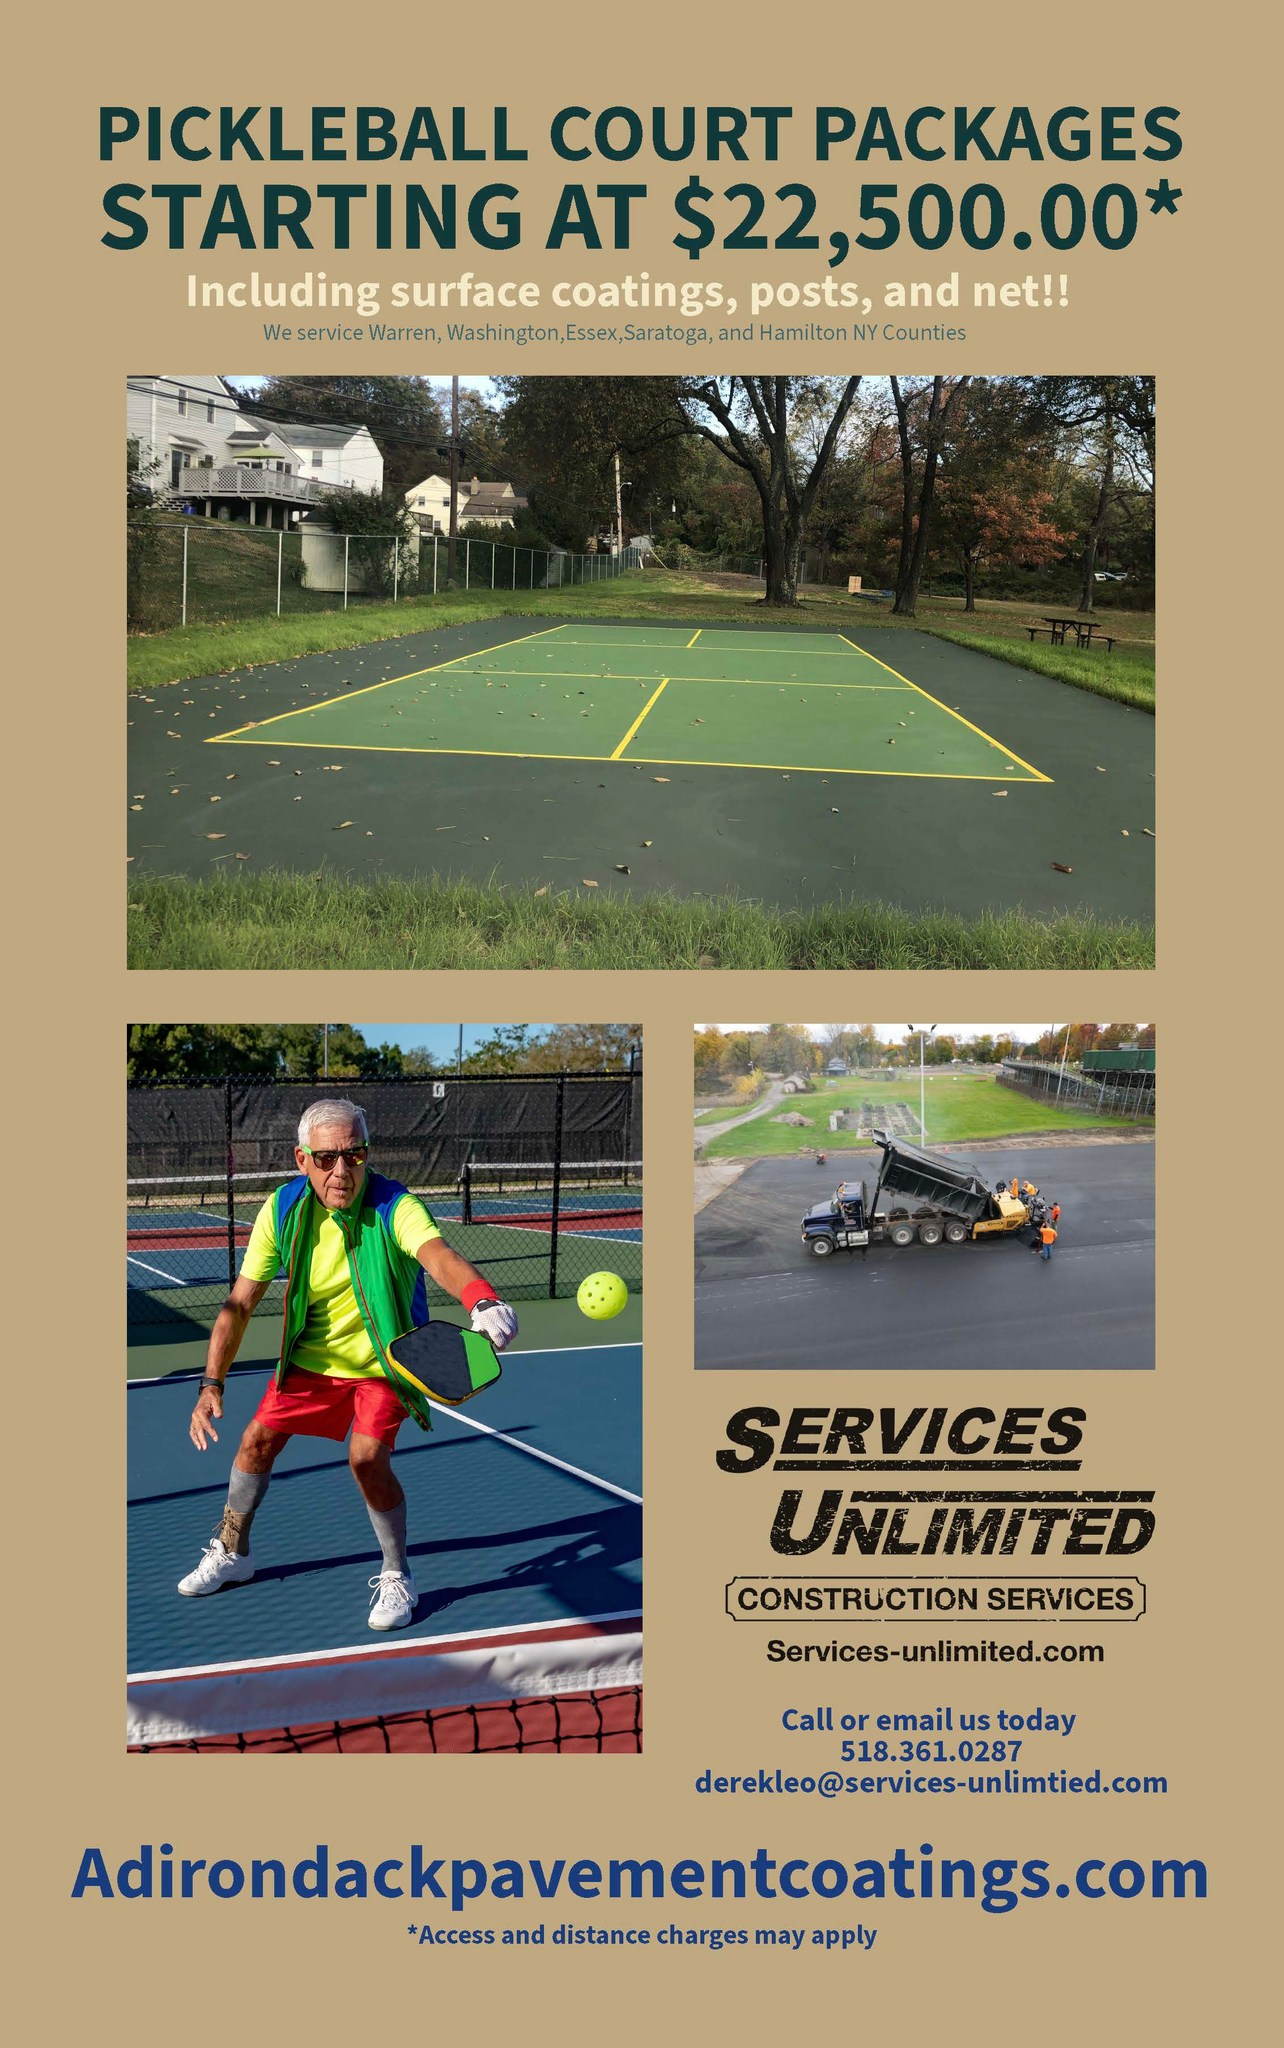 Spring is here and why not have your own pickleball court?!